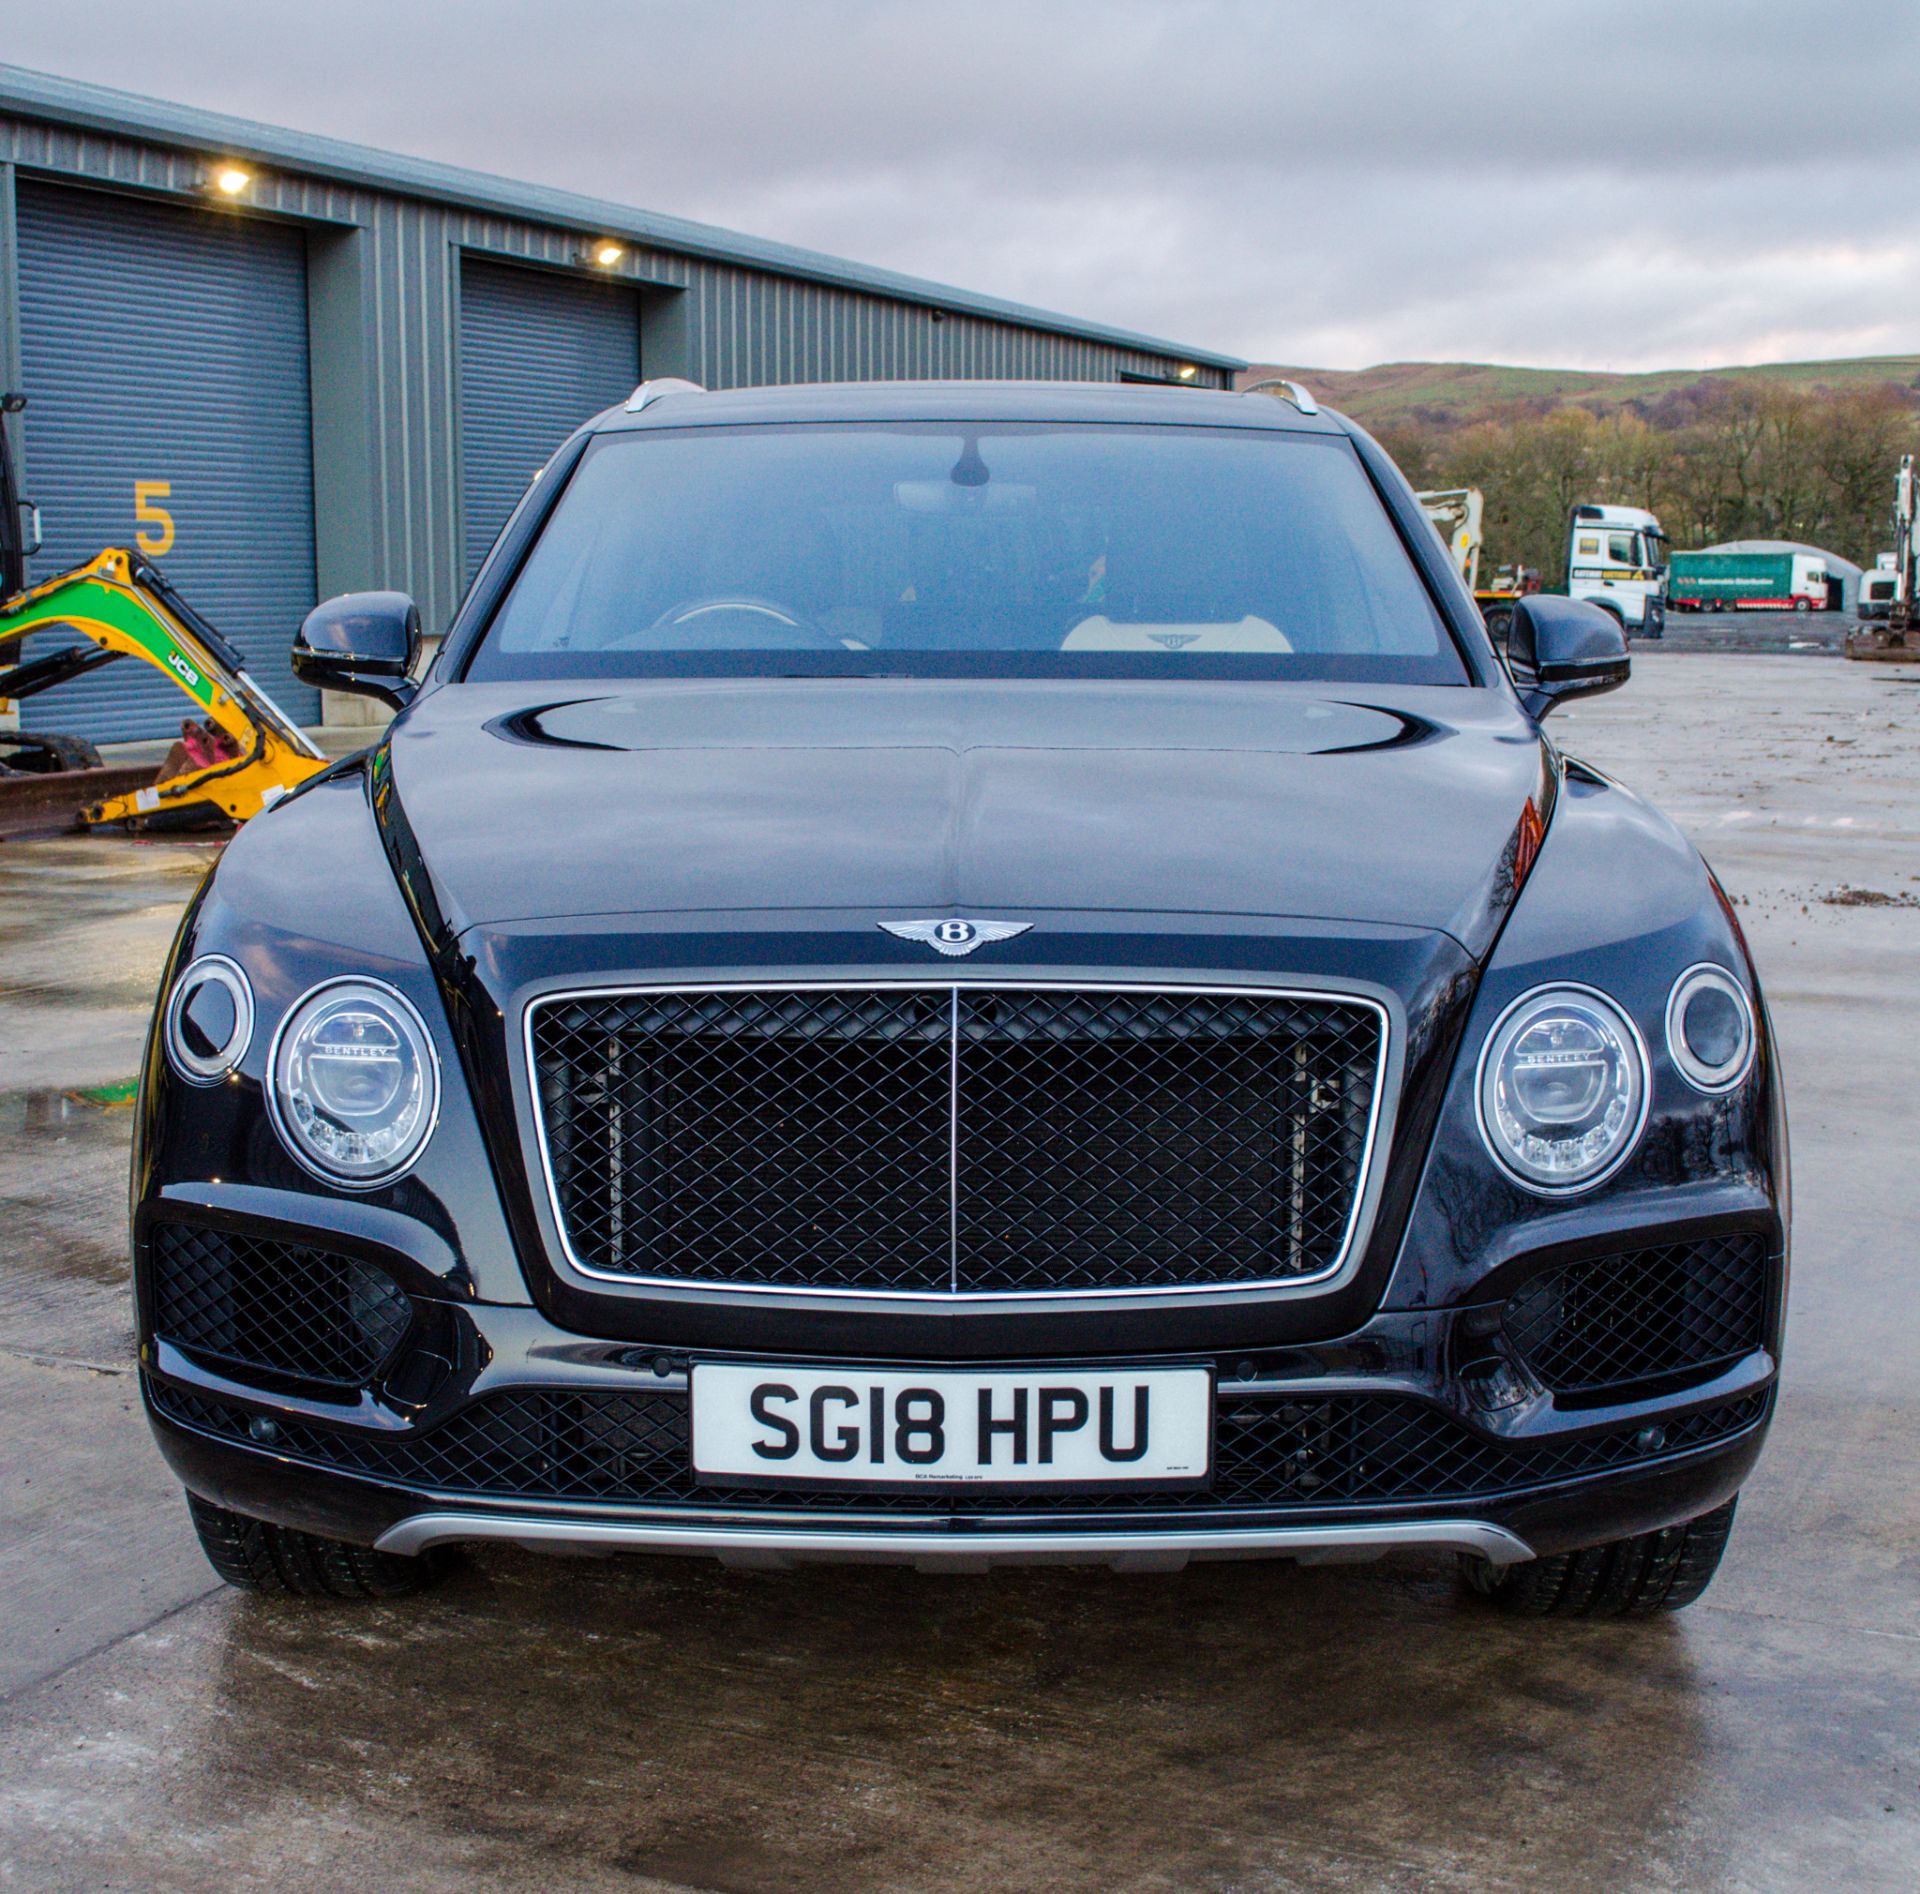 Bentley Bentayga 4.0 V8 diesel 4wd 7 seat SUV Reg No: SG 18 HPU Recorded Mileage: 37,650 Date of - Image 5 of 41